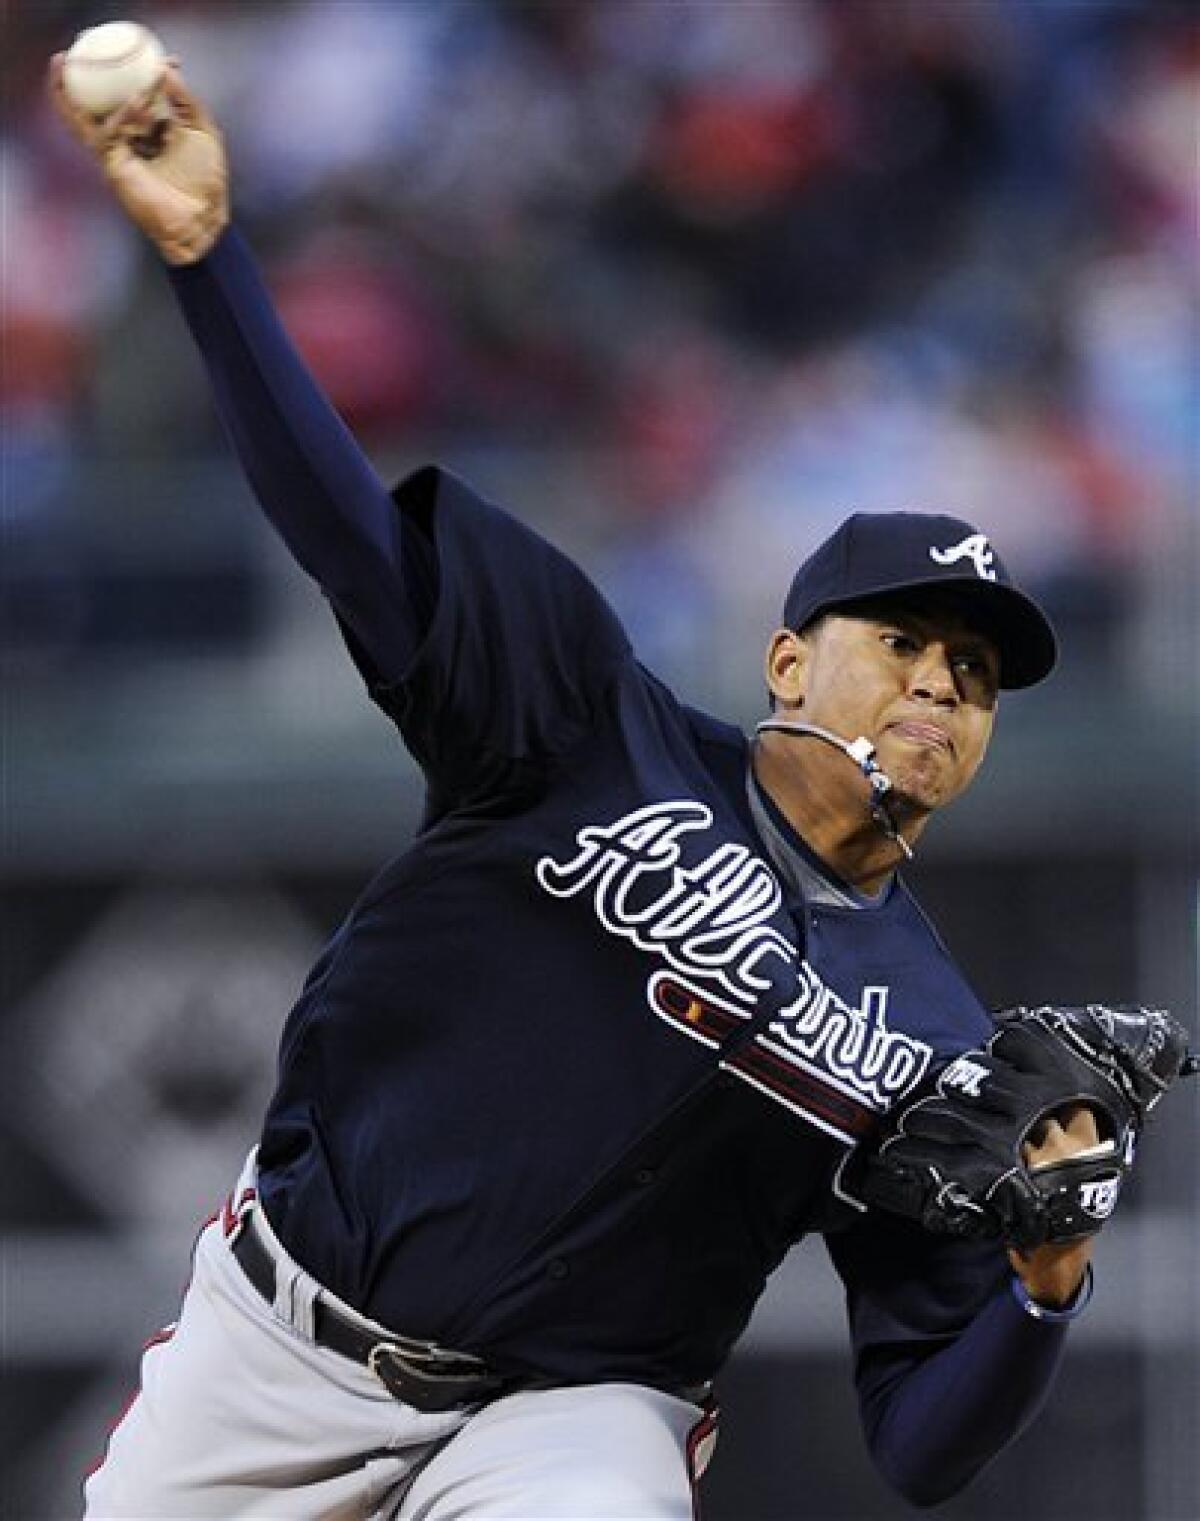 Jair Jurrjens pitches Braves over Phillies - The San Diego Union